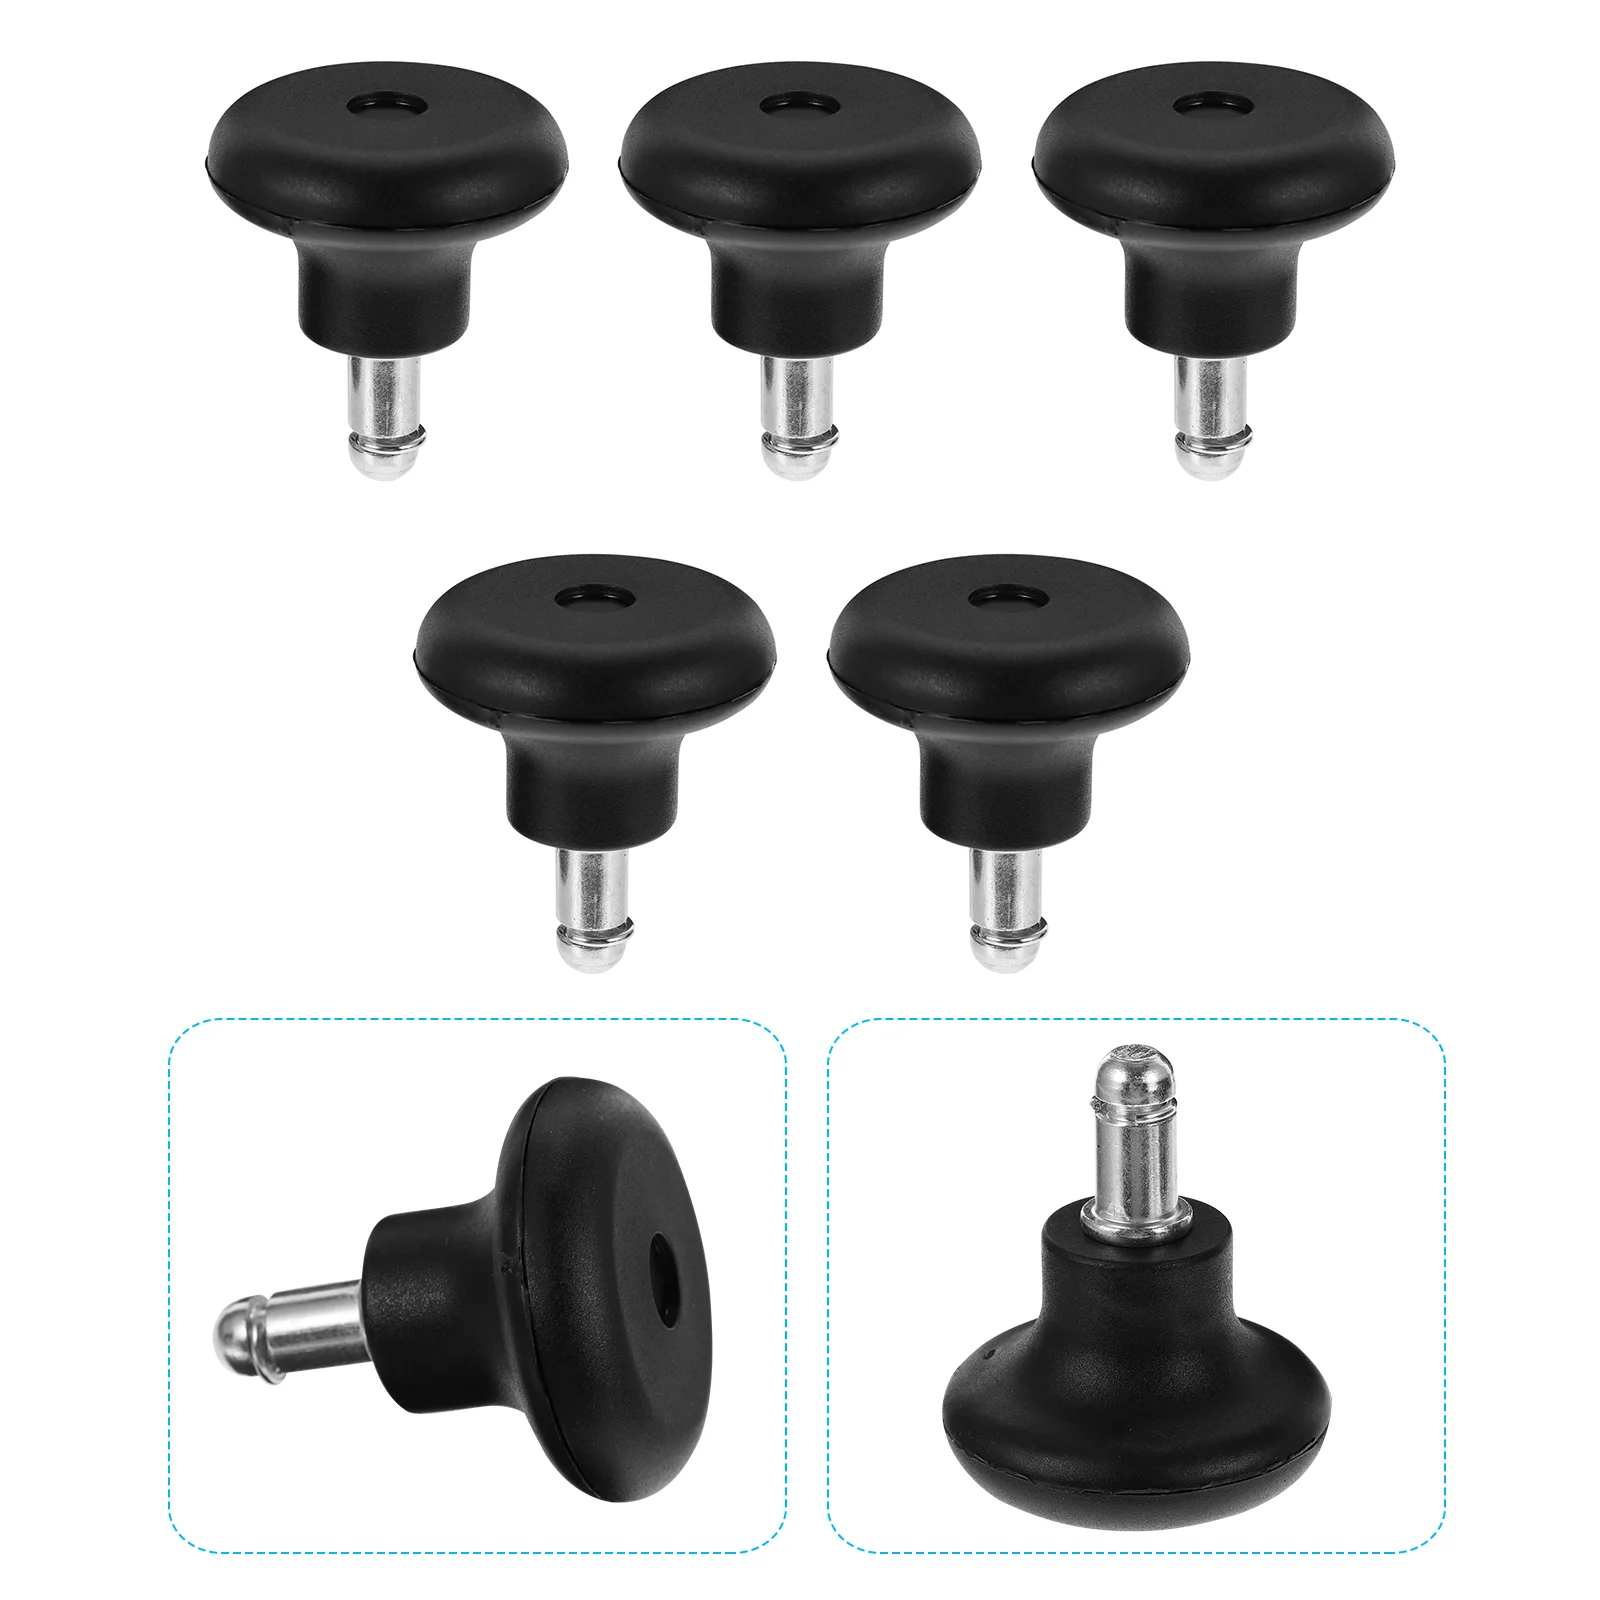 

5pcs Office Chair Bell Glides Replacement Chair Wheels Stopper Anti- Stool Swivel Caster Wheels to Fixed Stationary Castors for